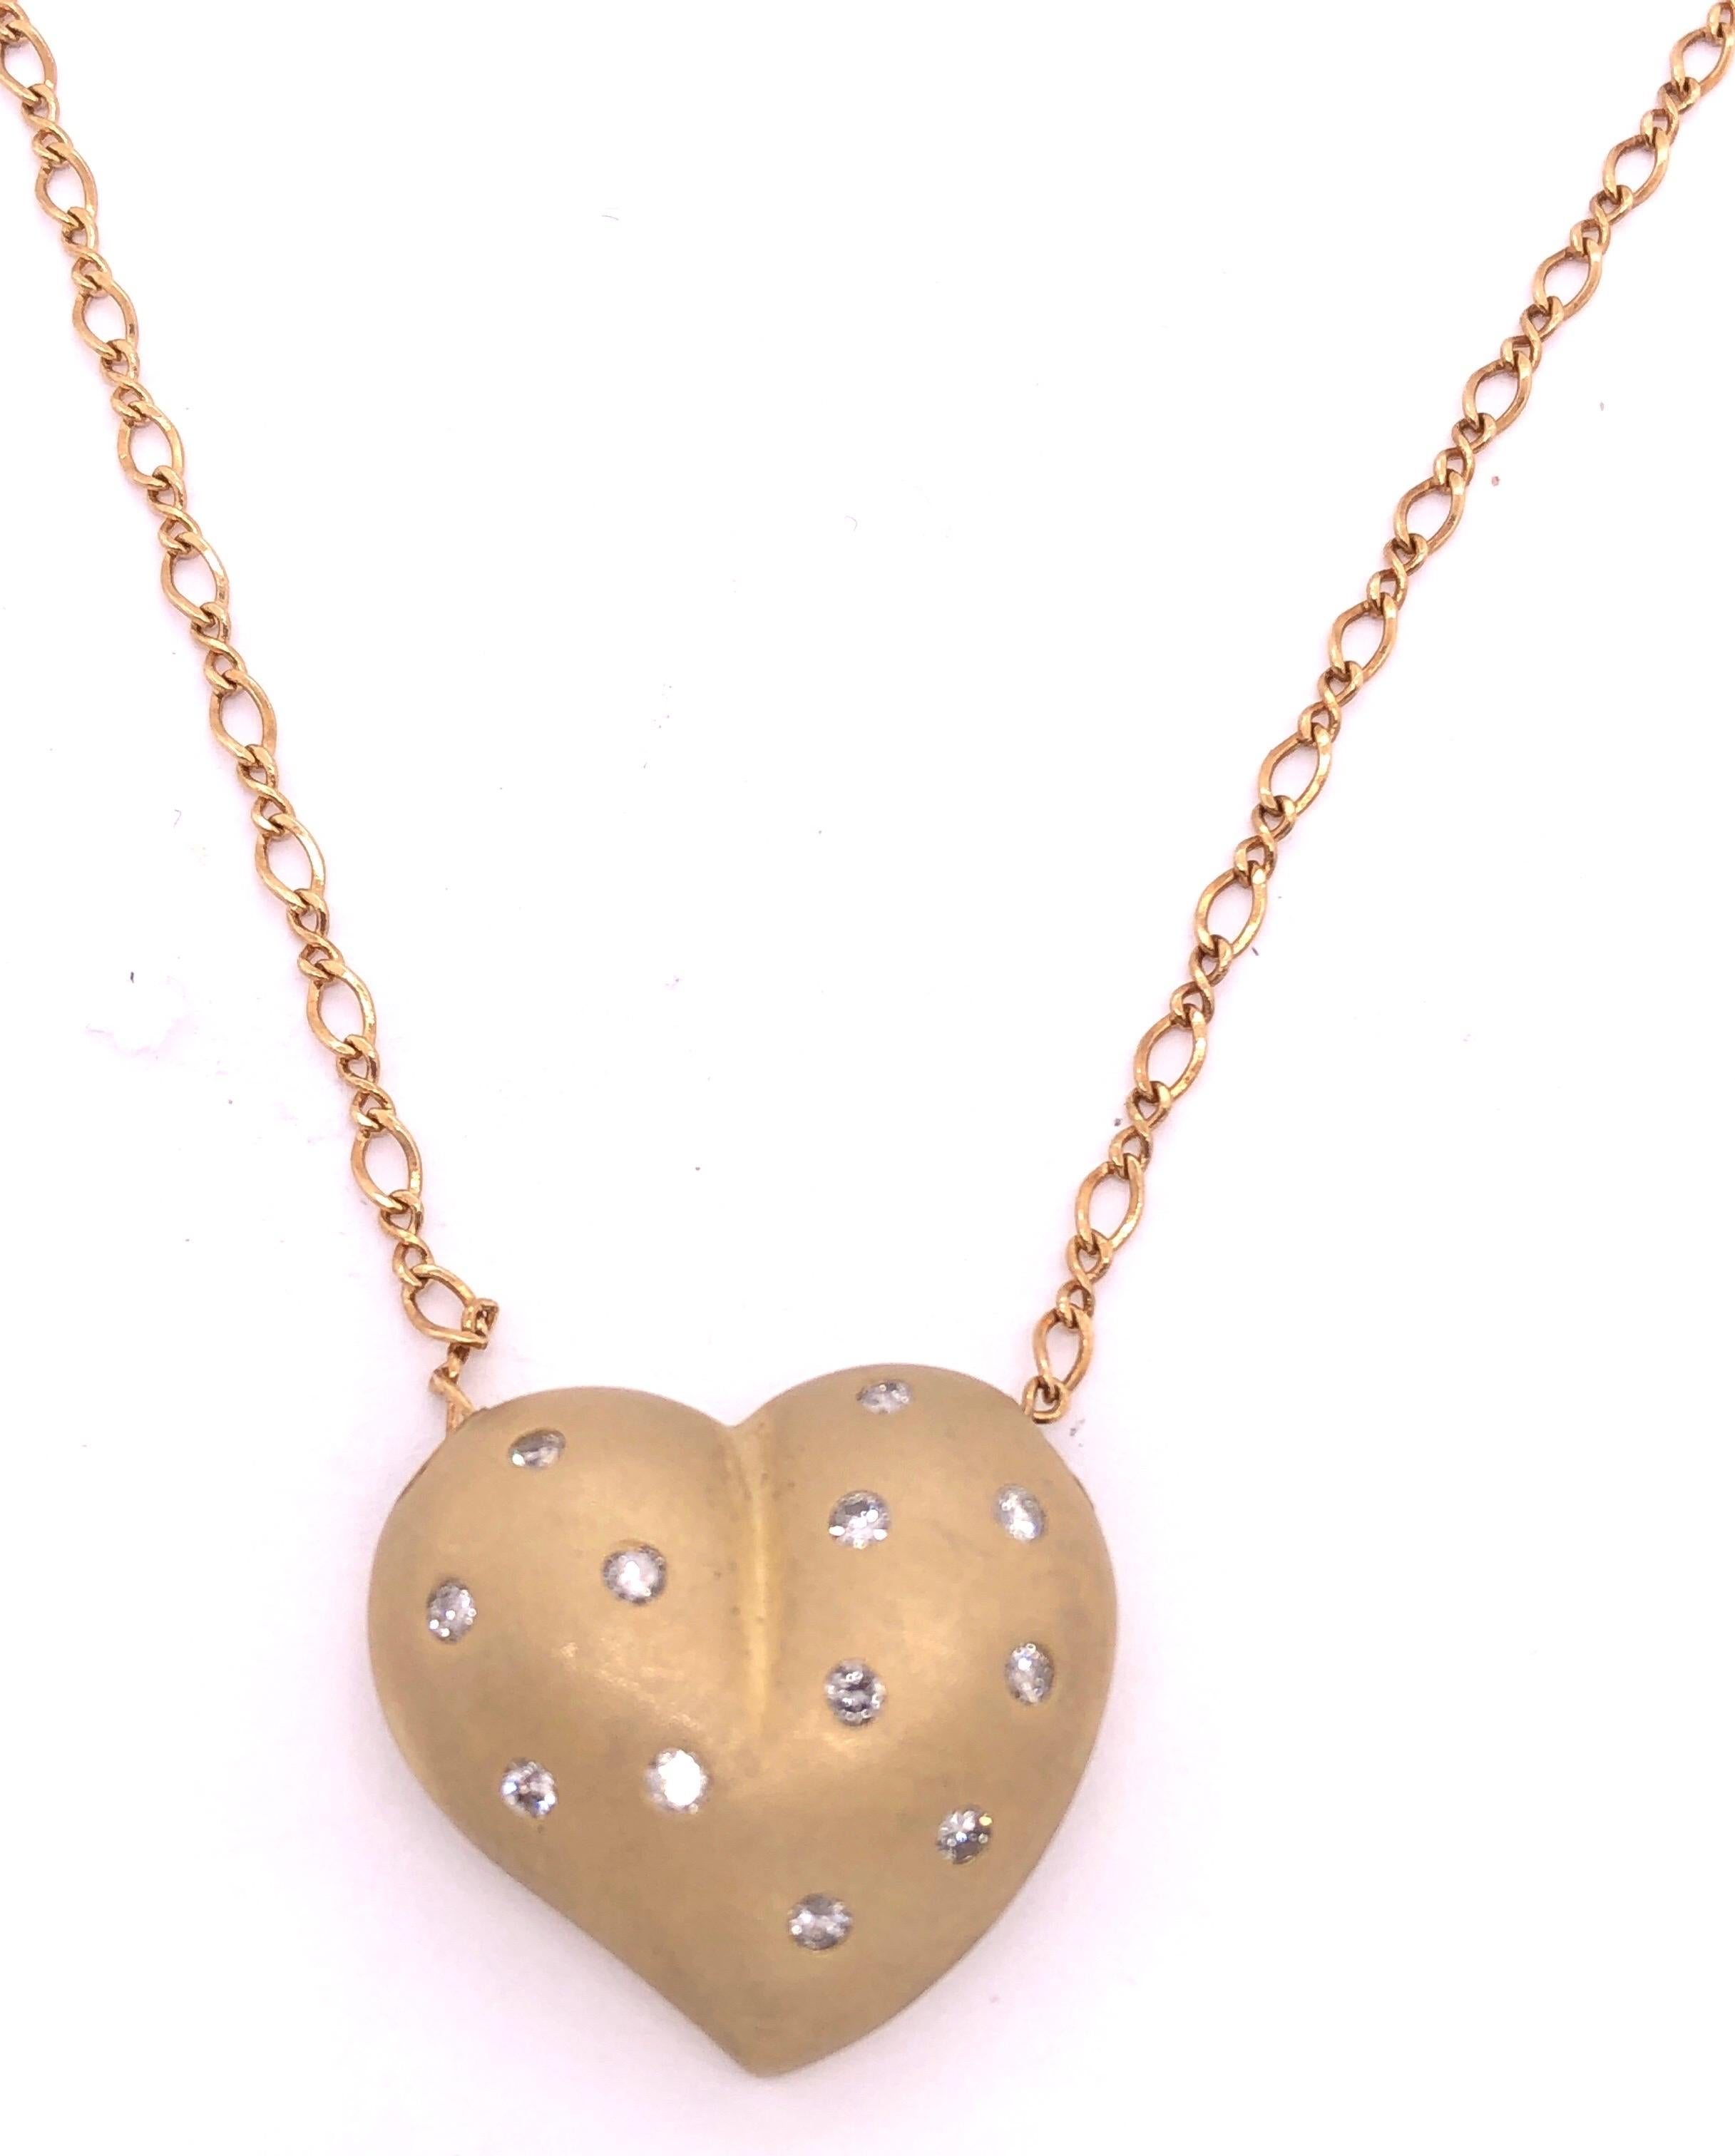 brushed gold heart necklace